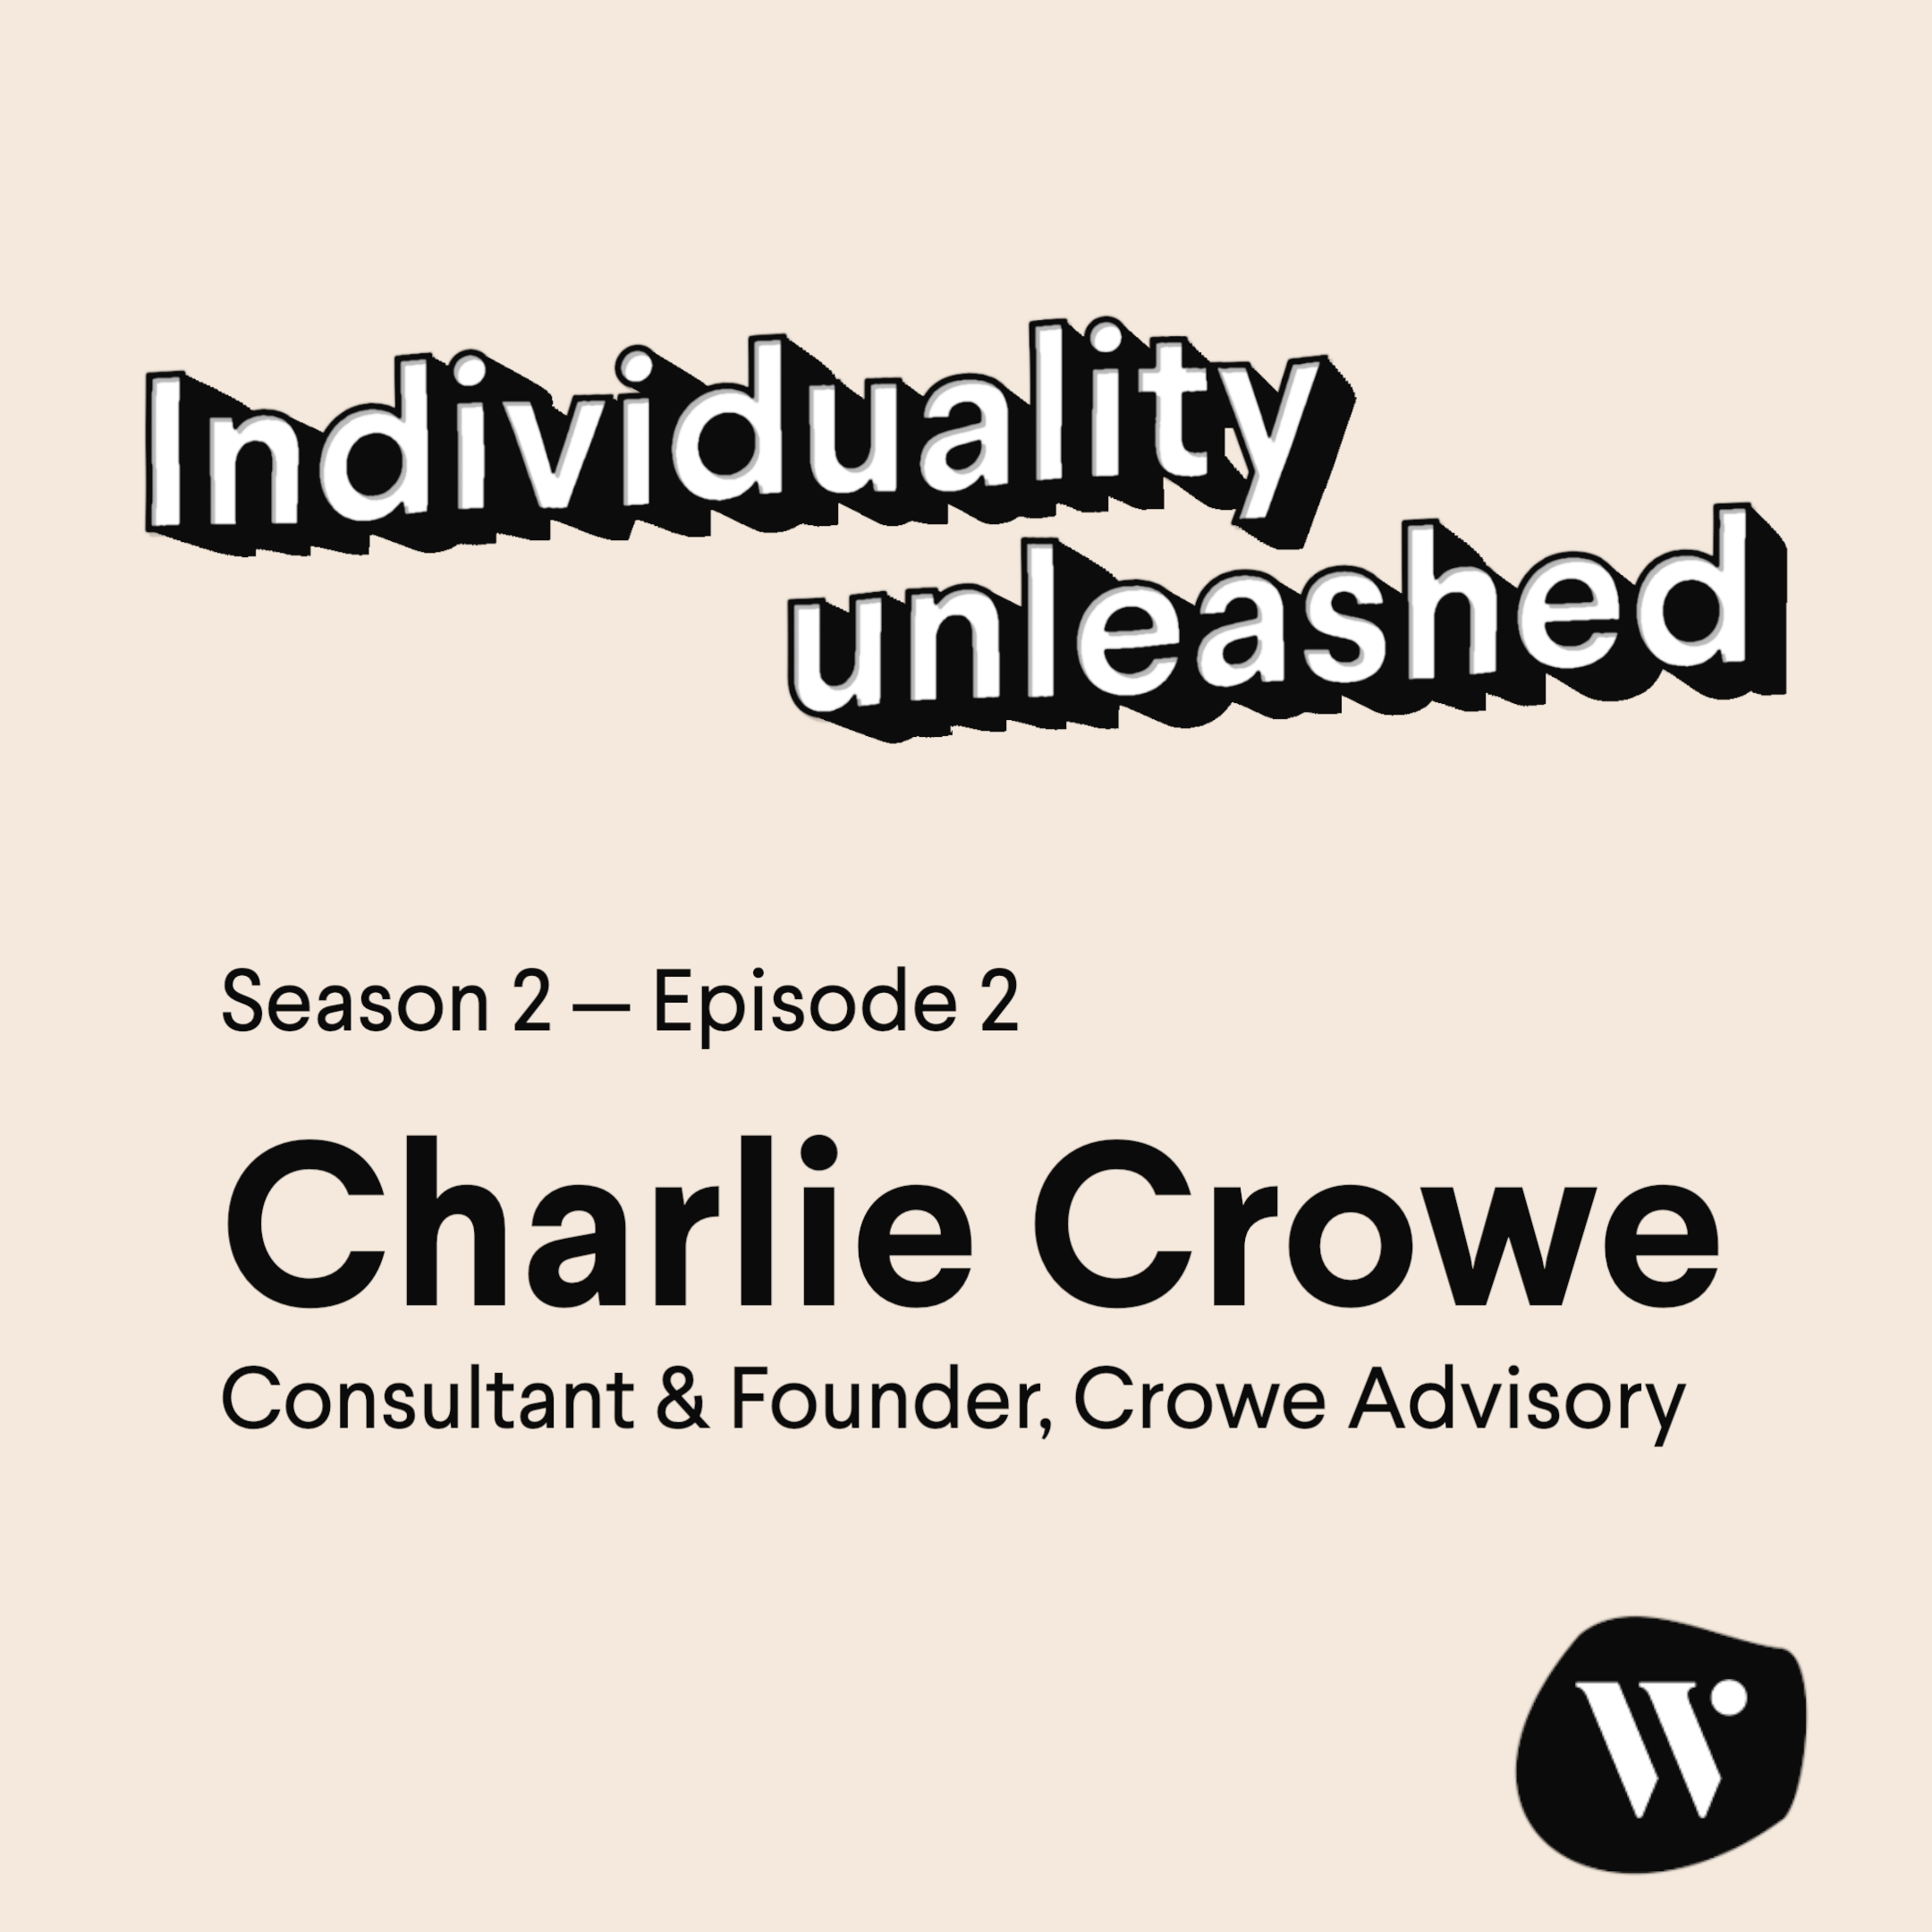 Attention & Ethical Advertising in the UK Ad Industry with Charlie Crowe